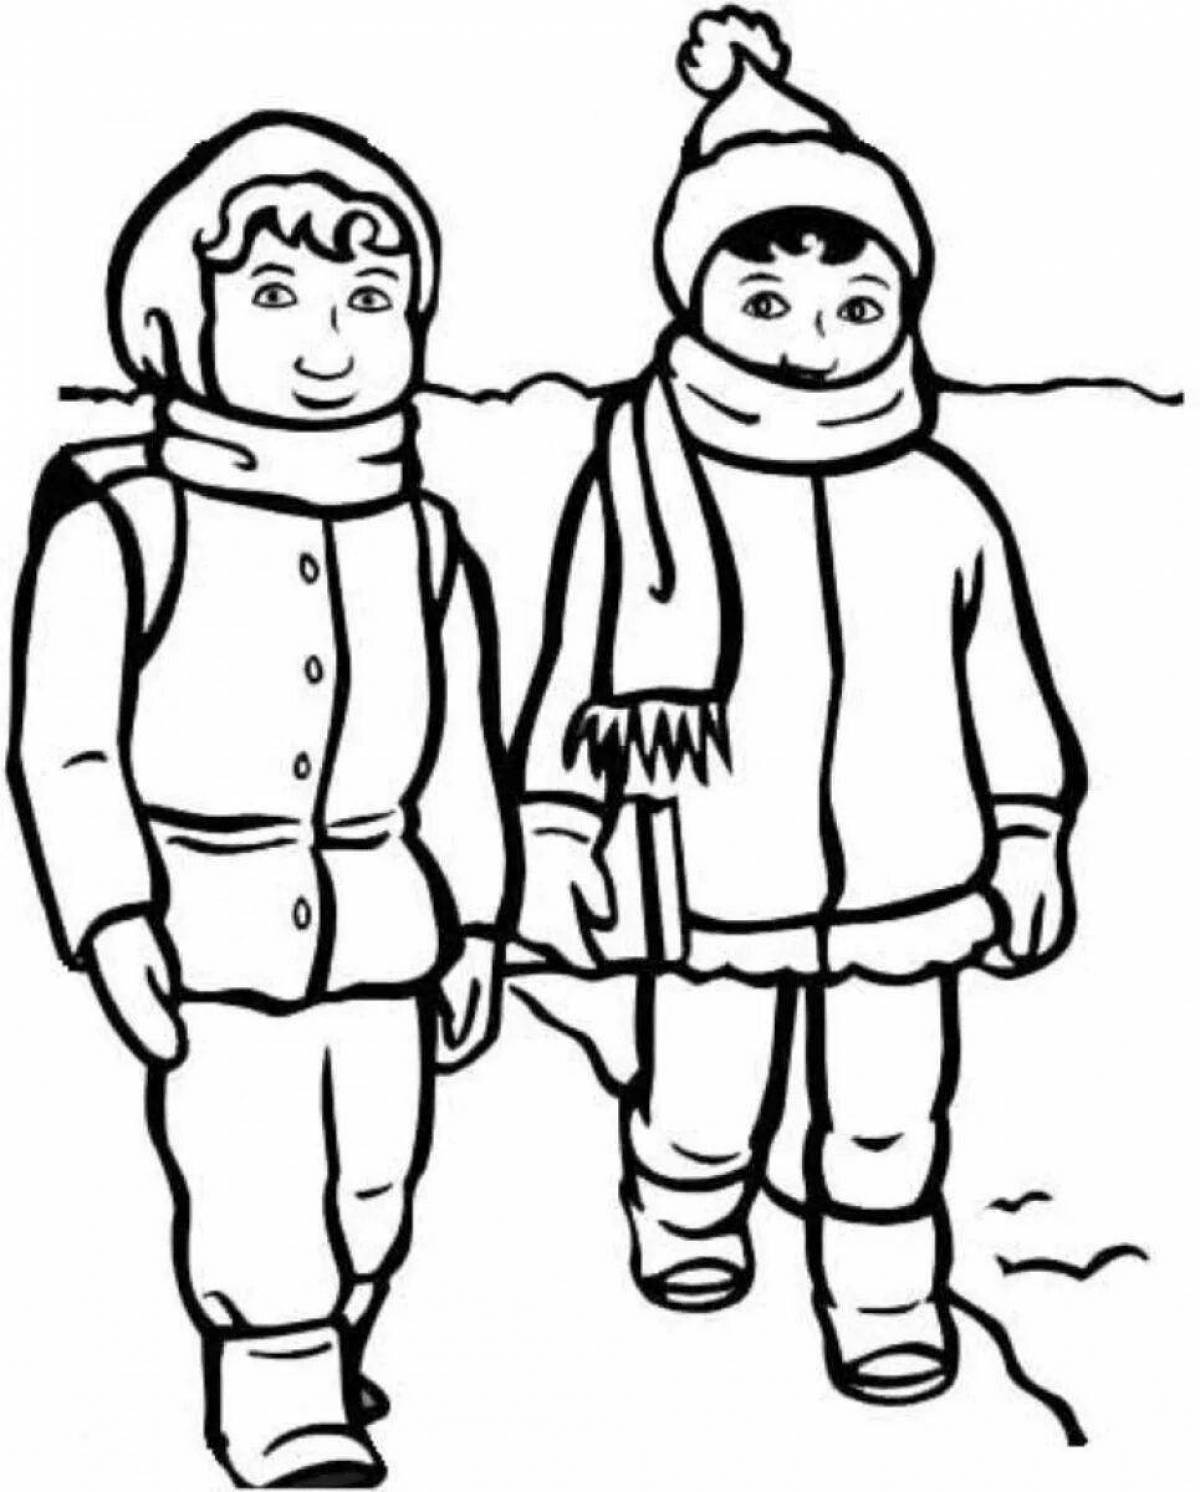 Funny coloring book for children boy in winter clothes